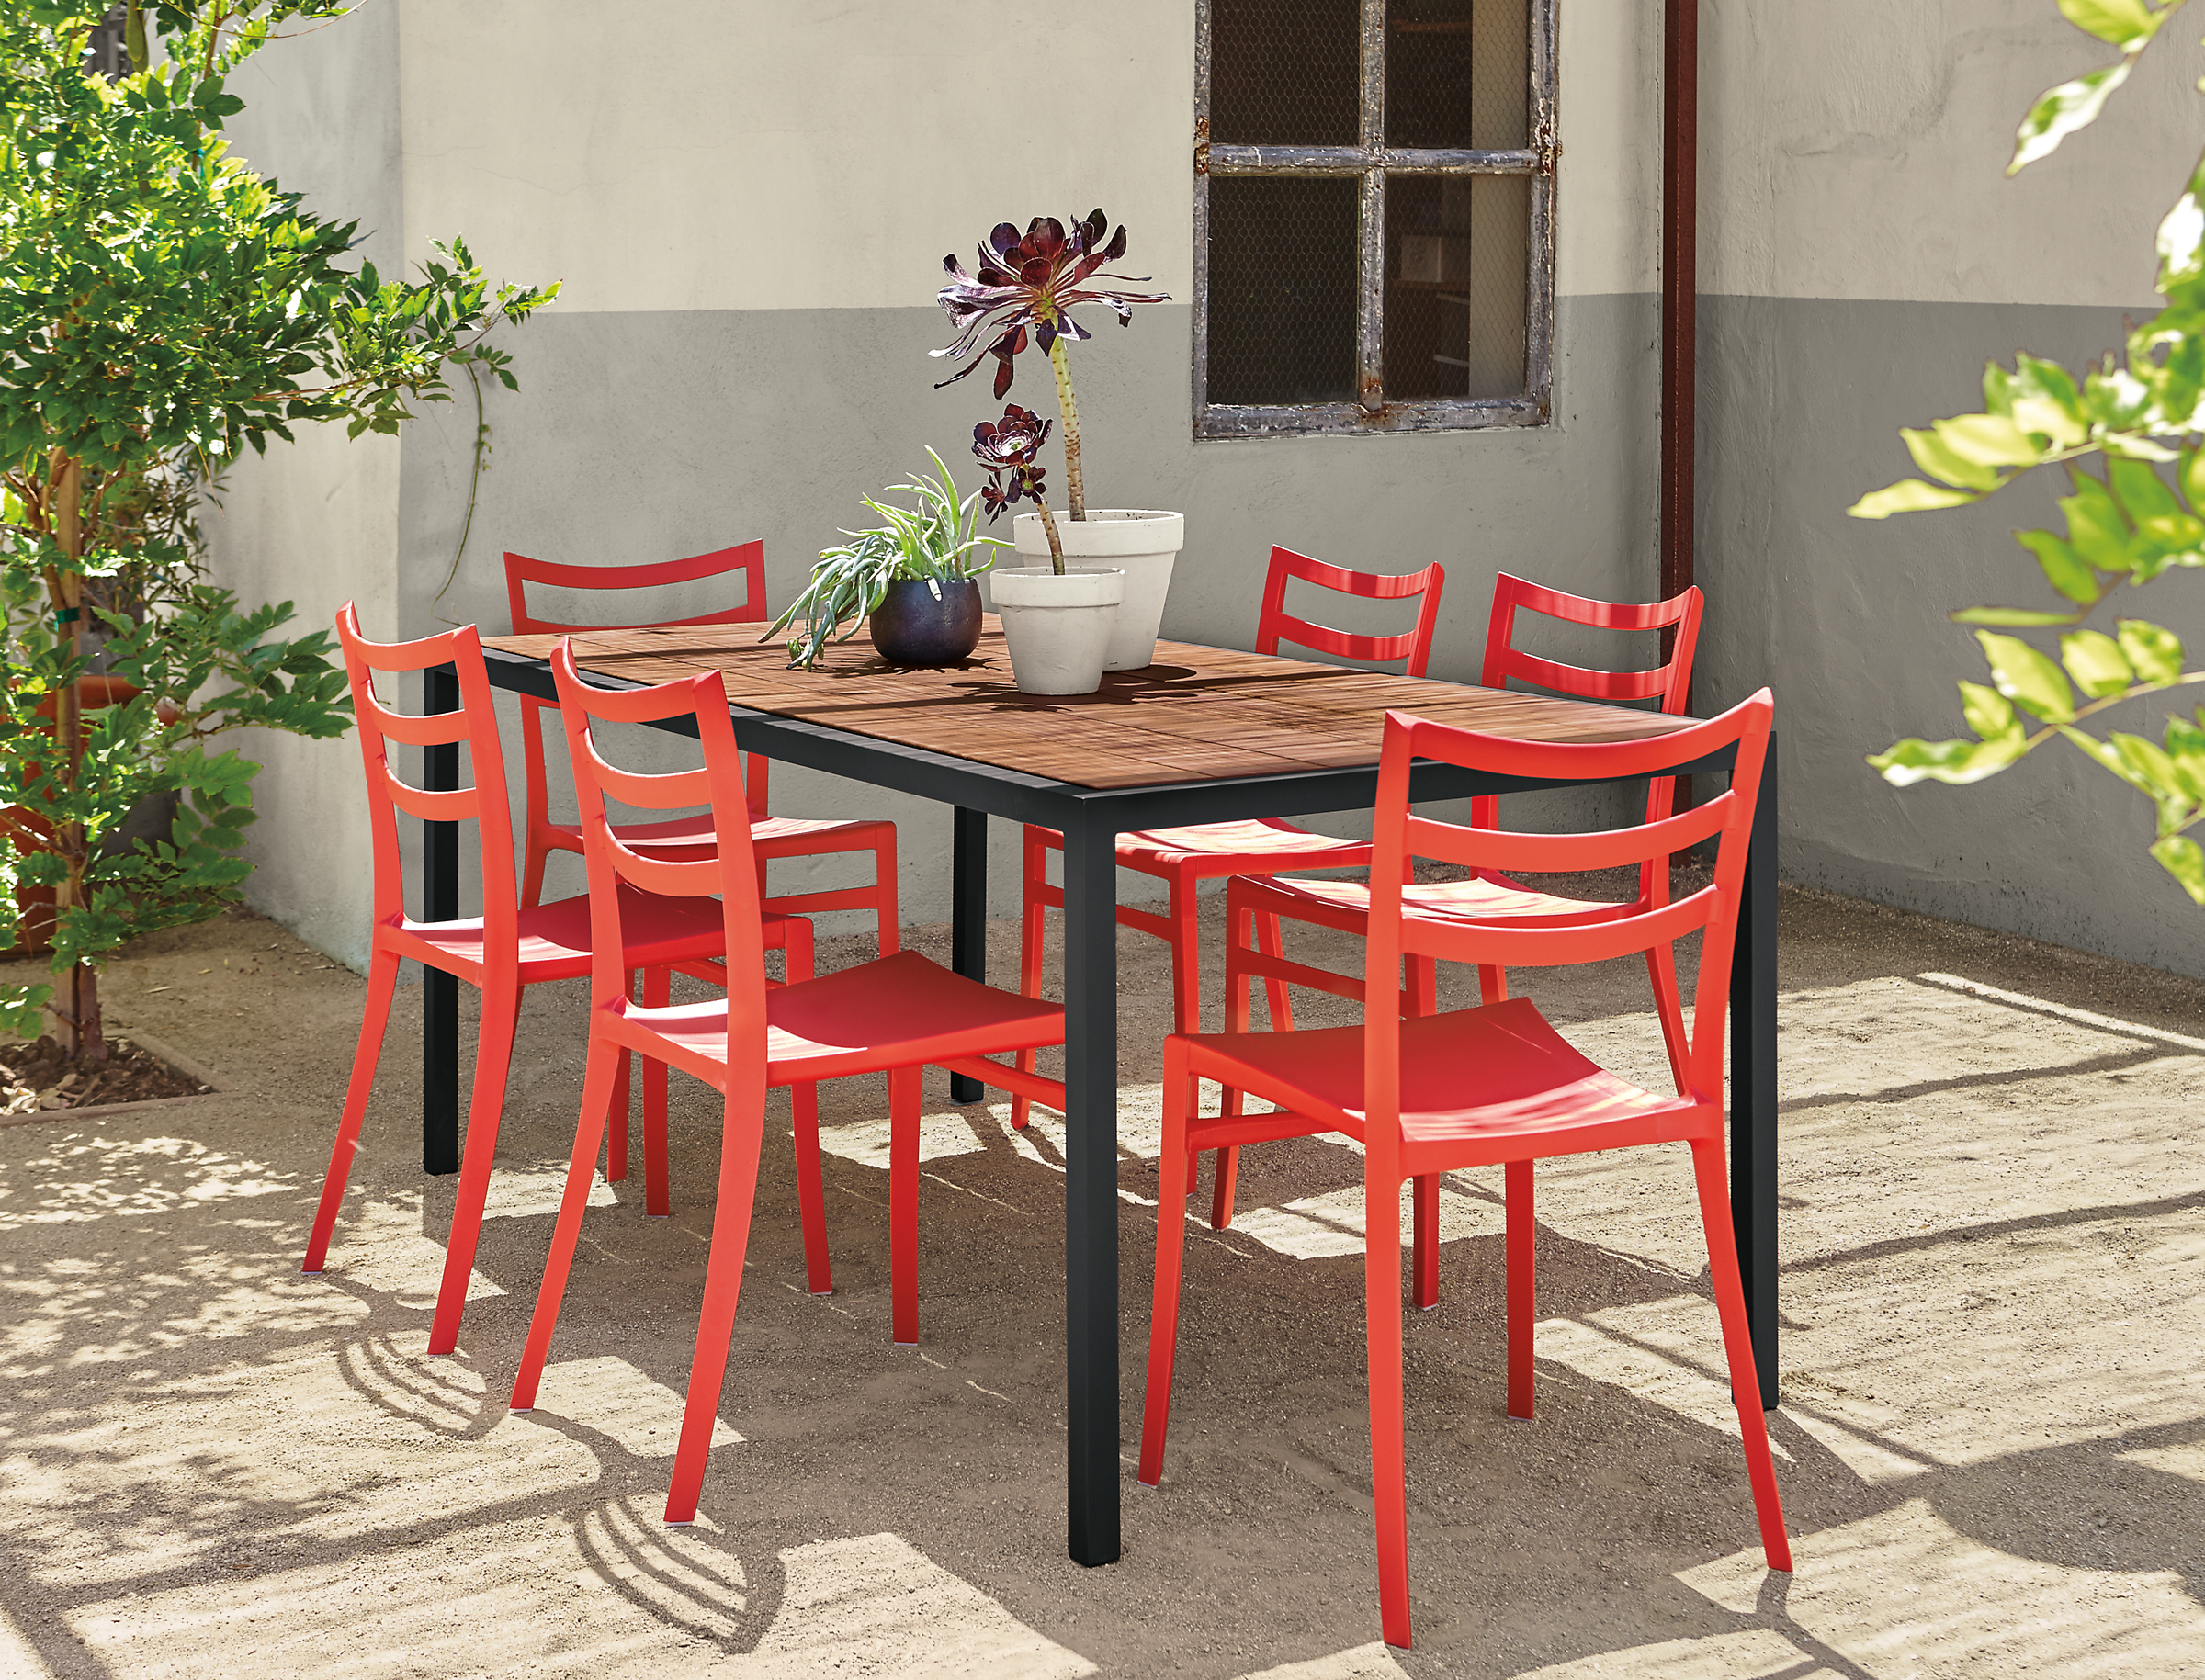 Montego table with six red chairs.